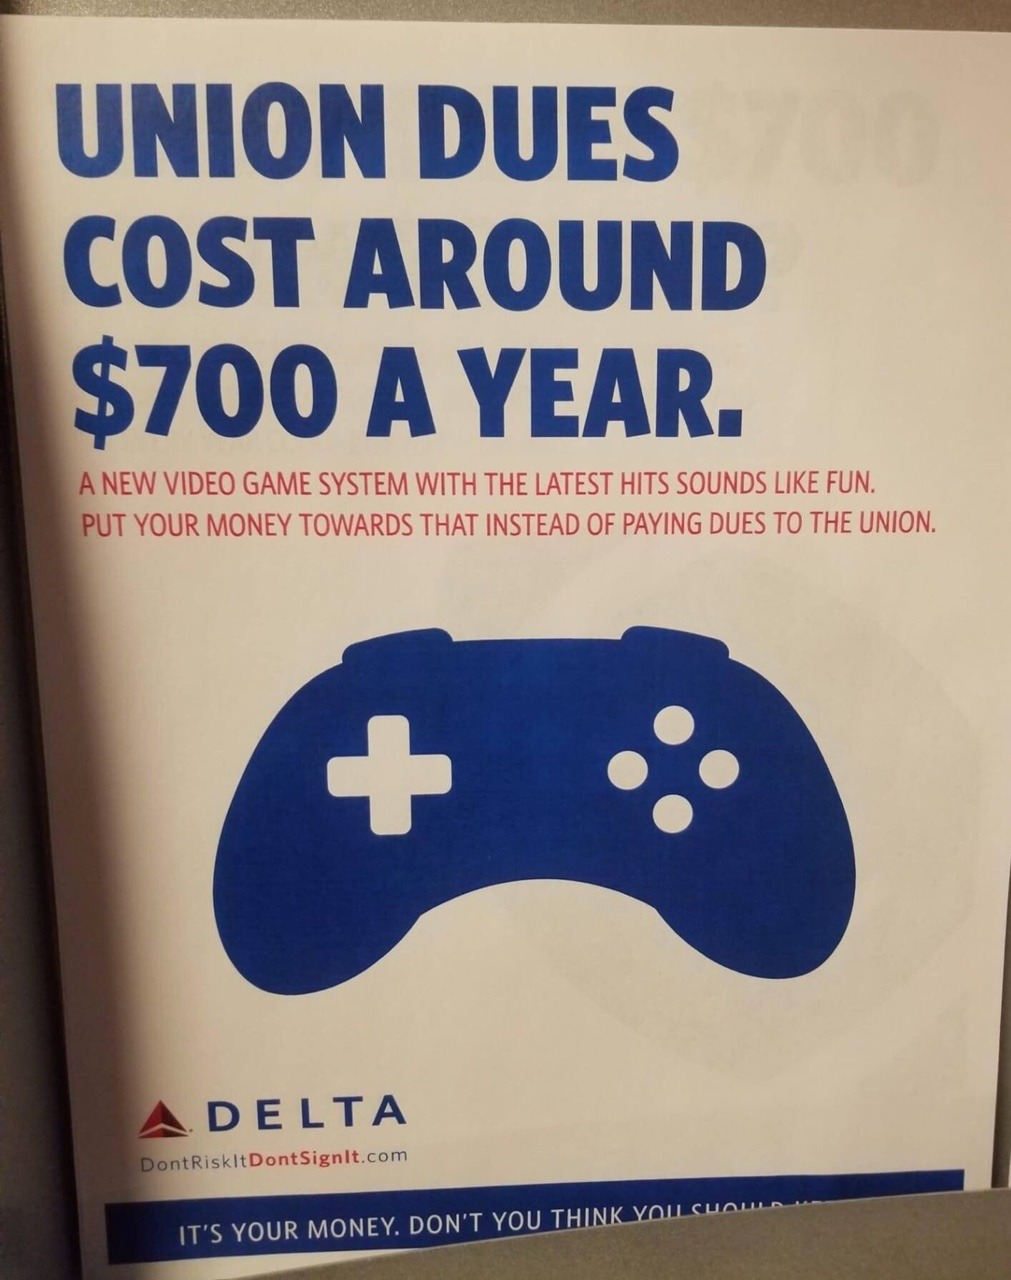 delta anti union - Union Dues Cost Around $700 A Year. A New Video Game System With The Latest Hits Sounds Fun. Put Your Money Towards That Instead Of Paying Dues To The Union. A Delta Dont Riskit Dont Signlt.com It'S Your Money. Don'T You Think Yolls